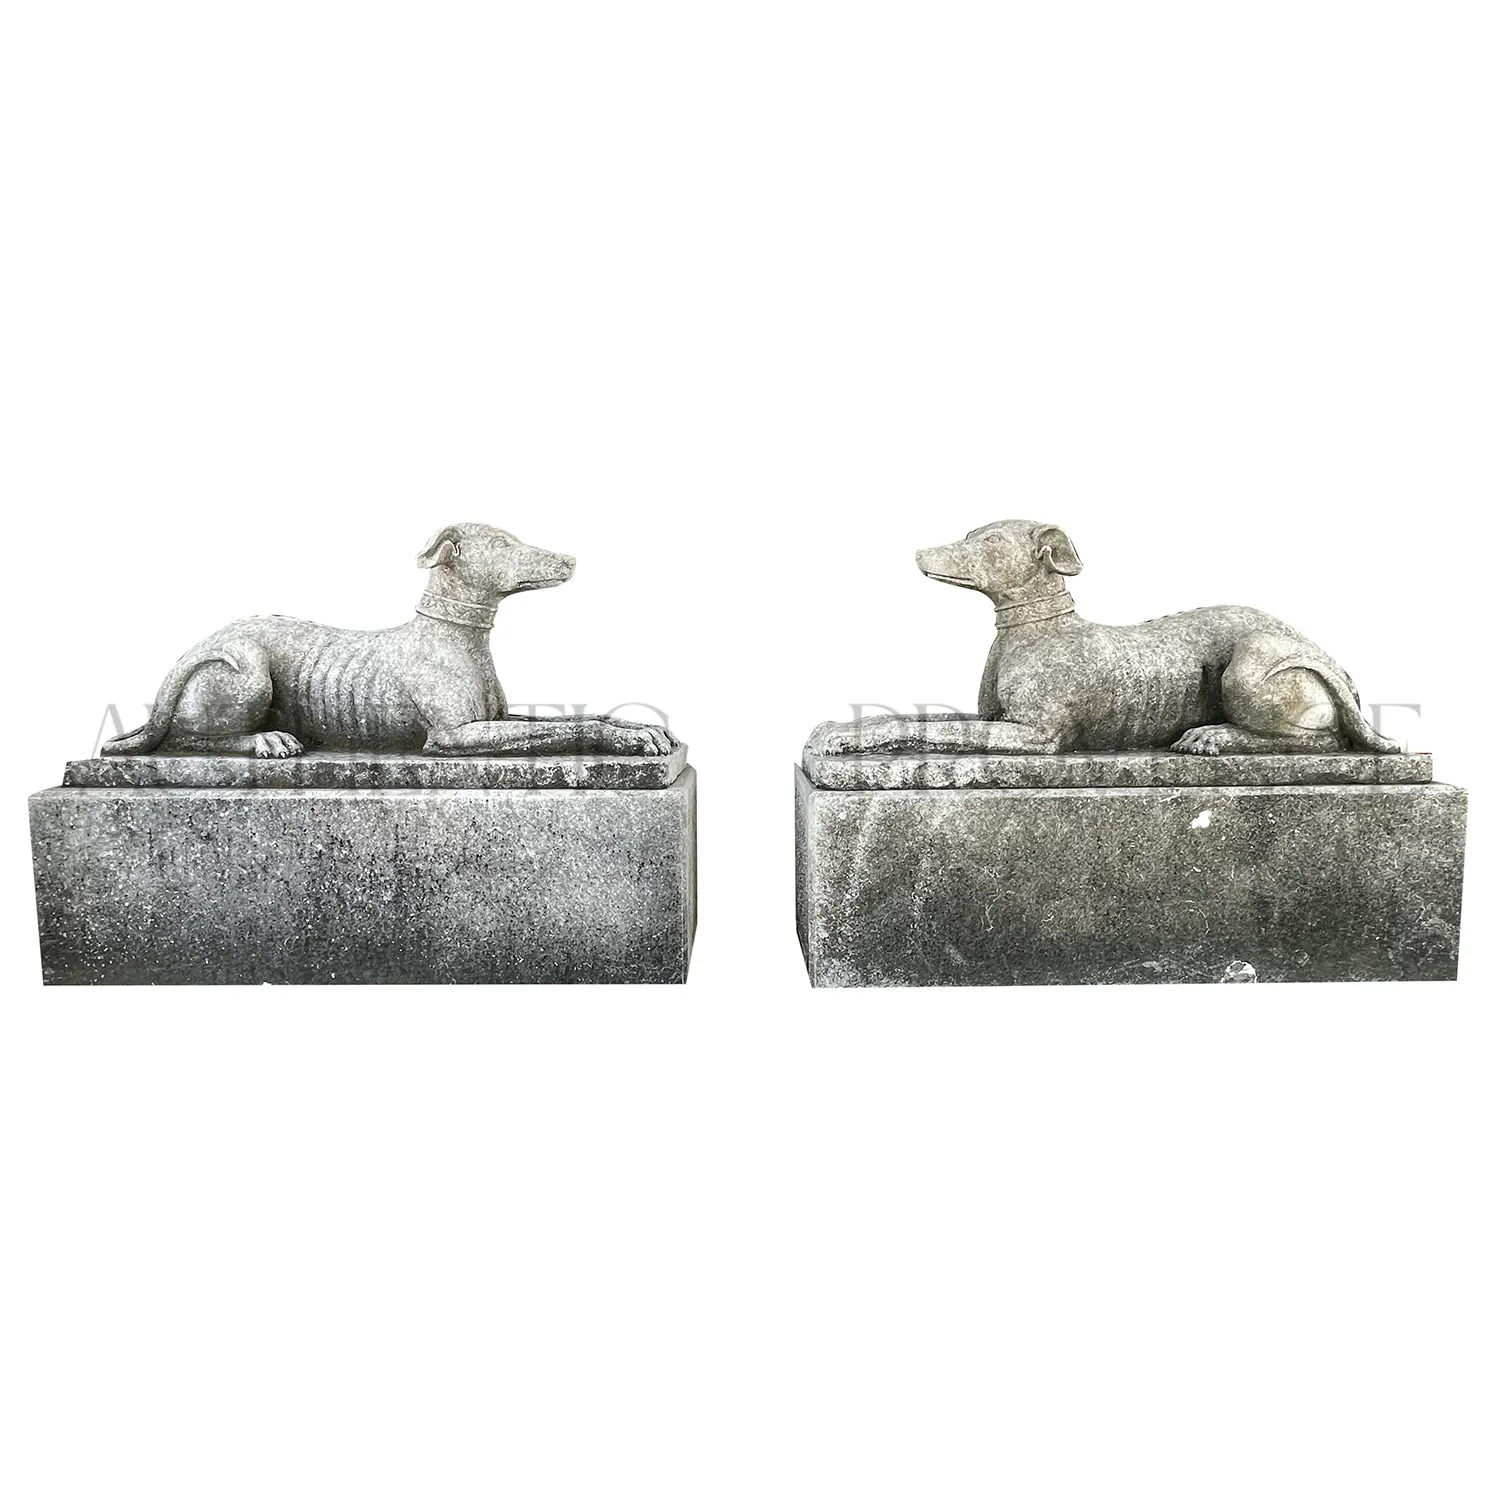 Vintage Pair of Whippet Garden Statues in Stone